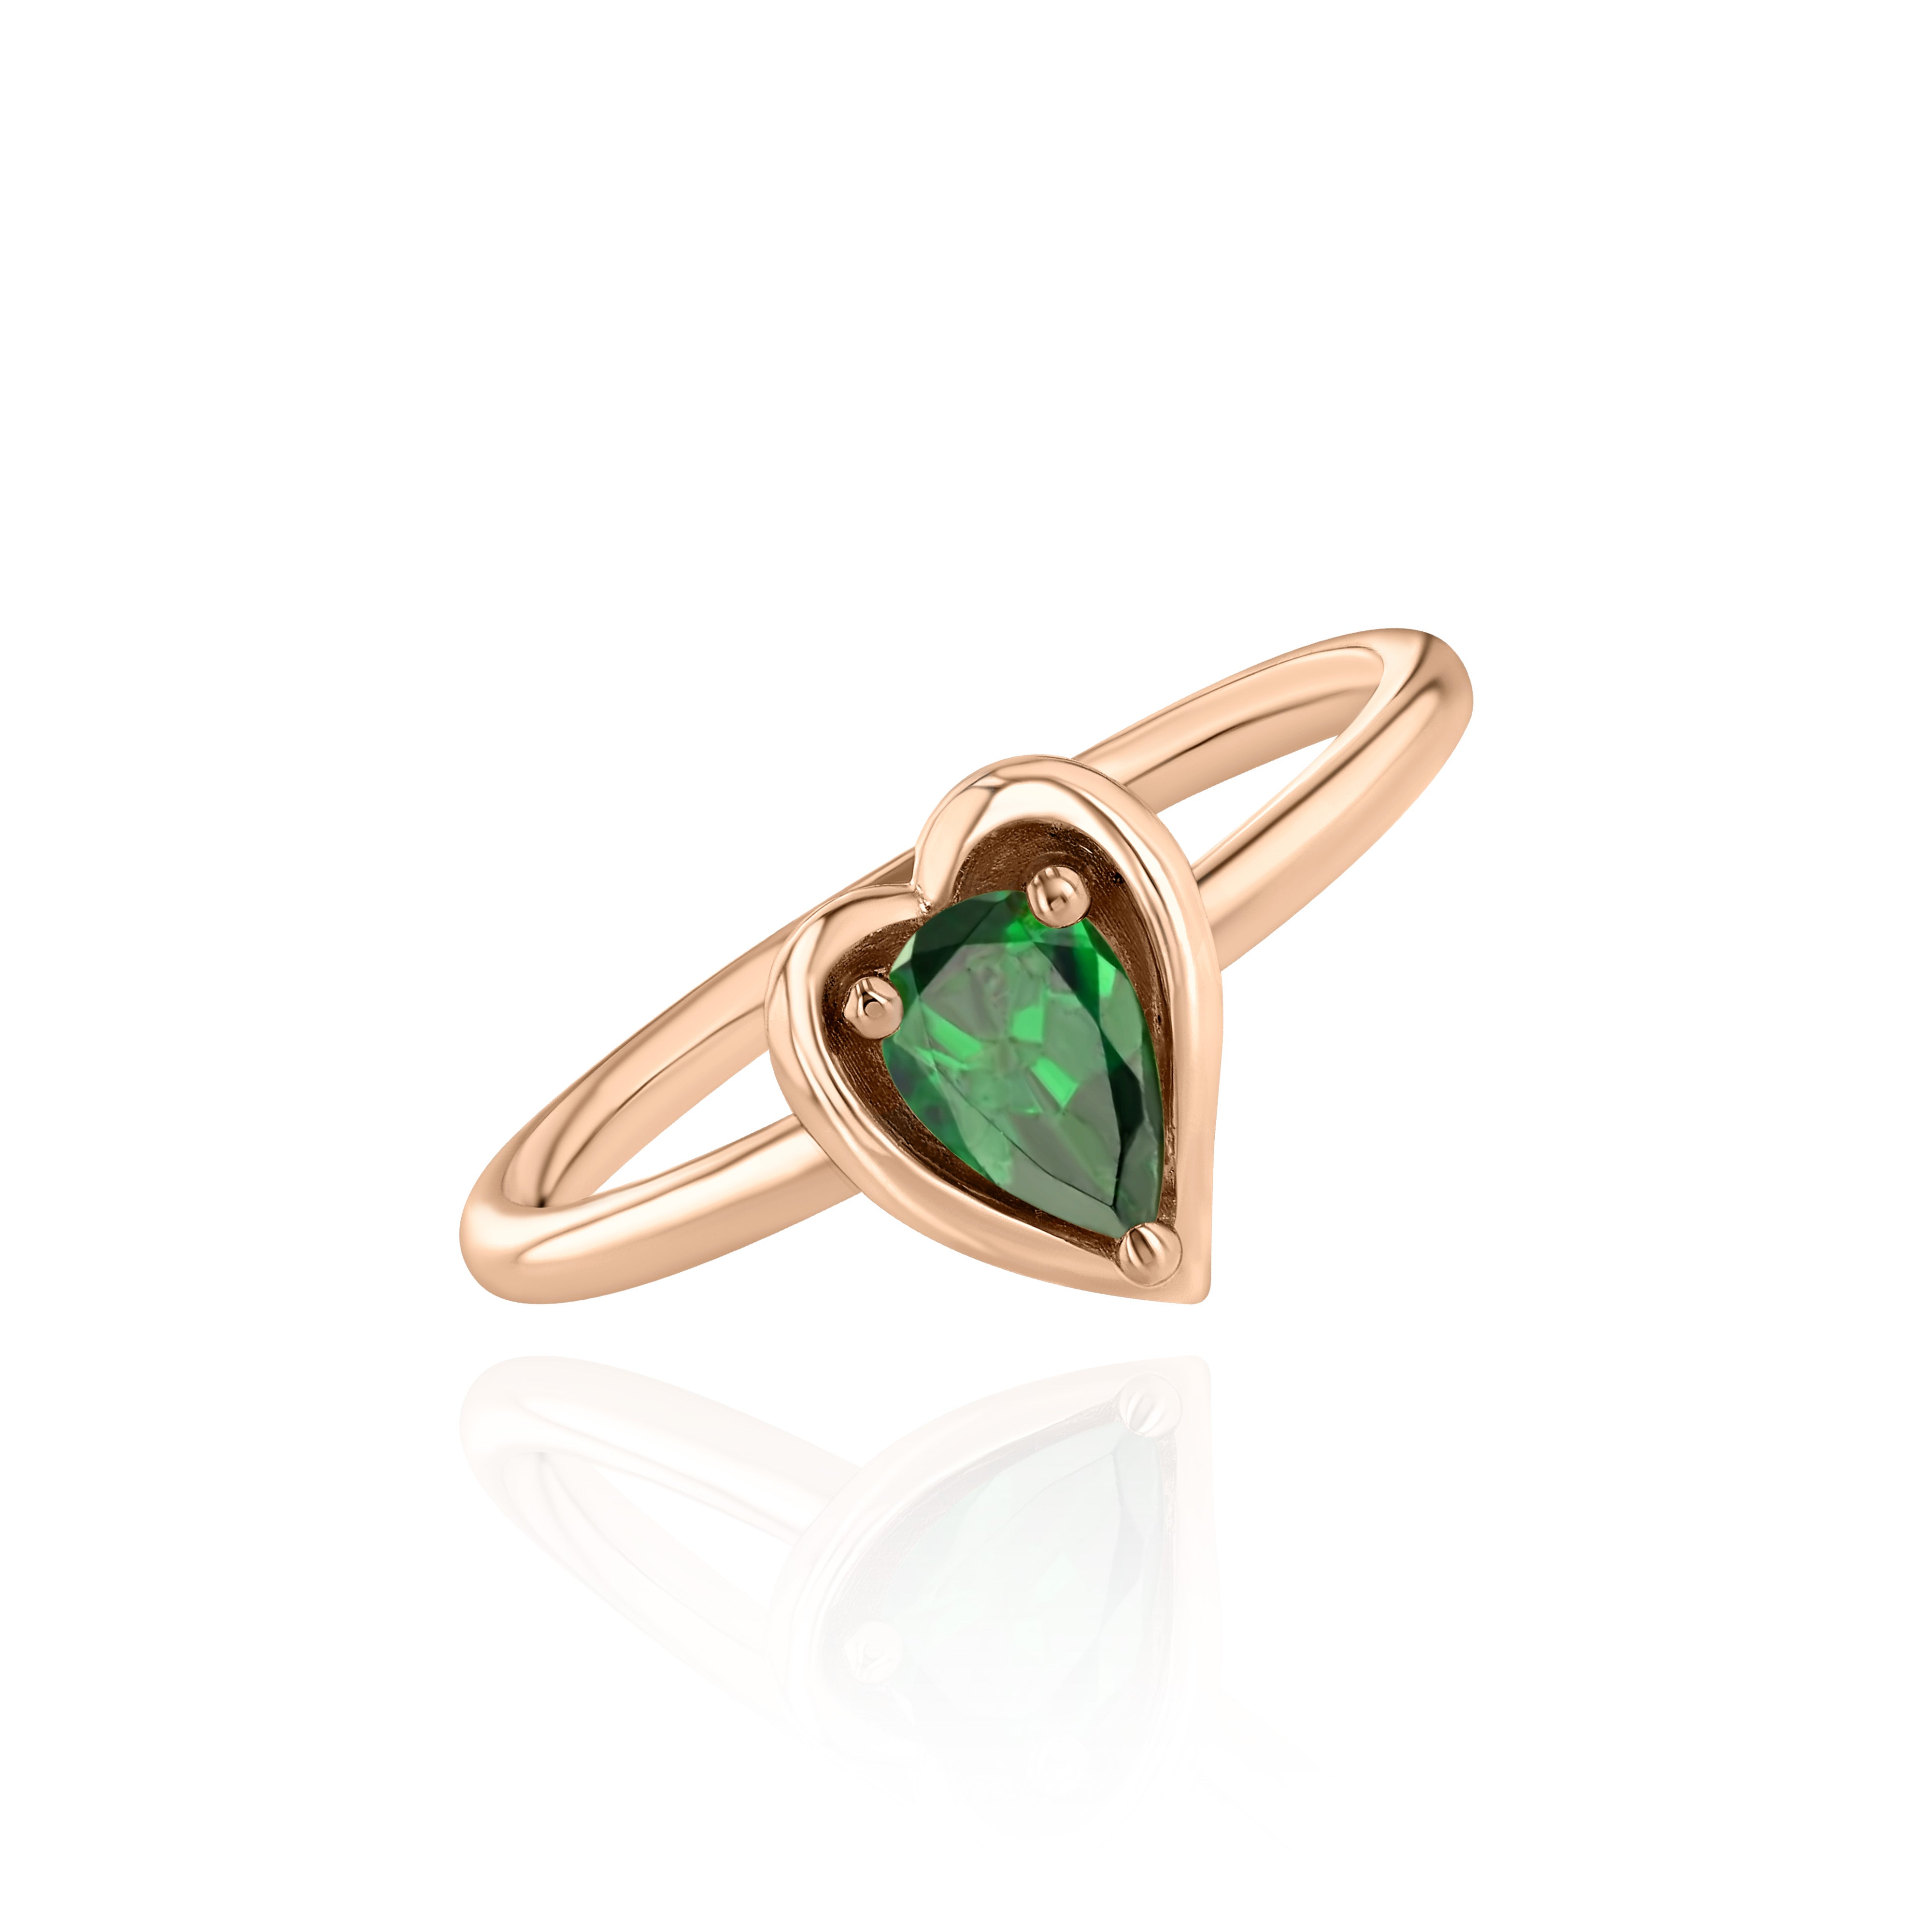 Rose Gold heart shaped ring with a pear shaped Tsavorite, Small